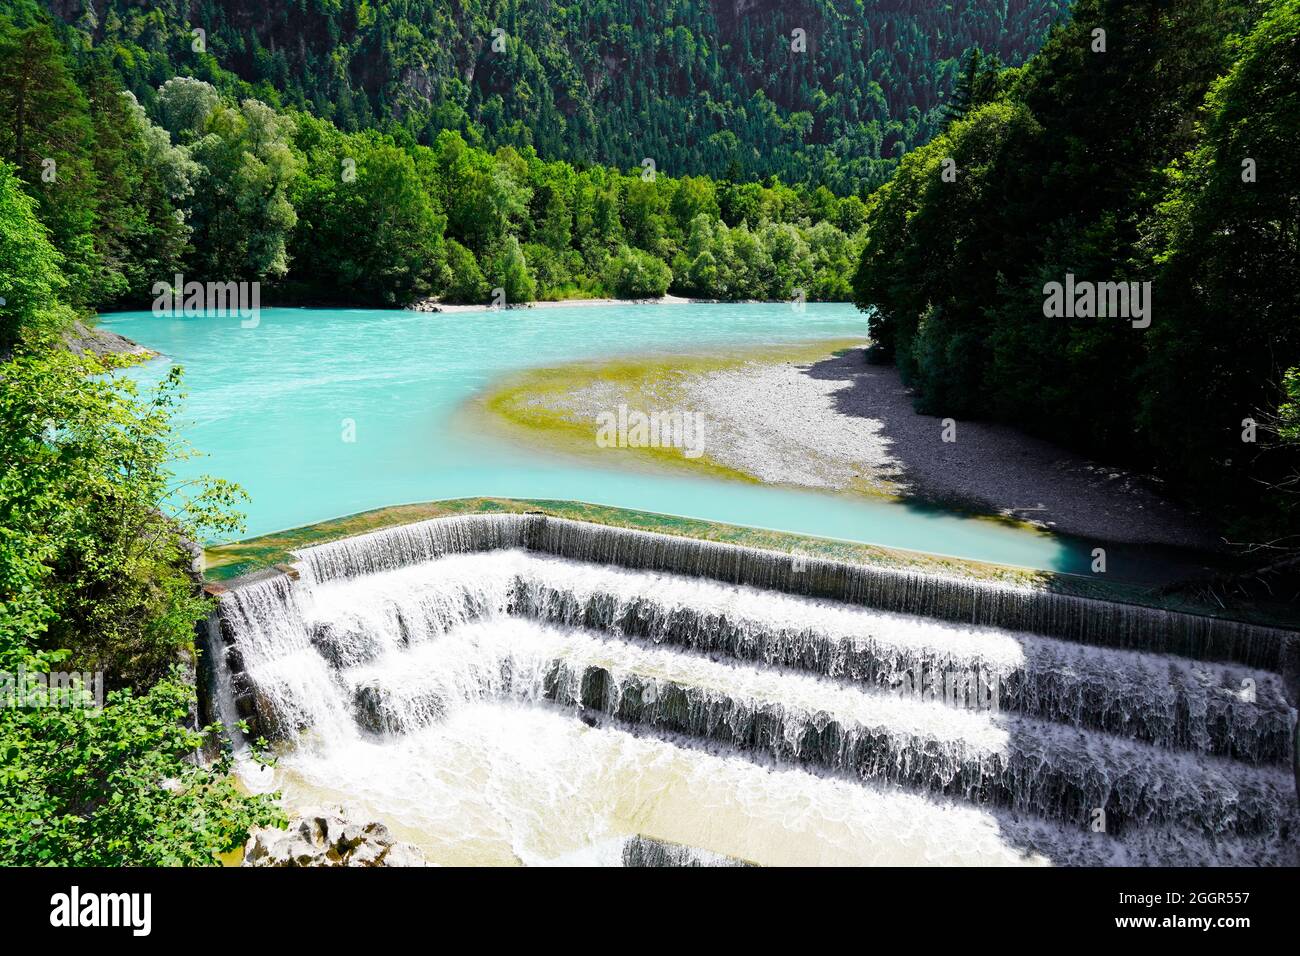 Lechfall near Füssen. Waterfall in Bavaria, Allgäu. River with turquoise blue water and surrounding landscape. Stock Photo